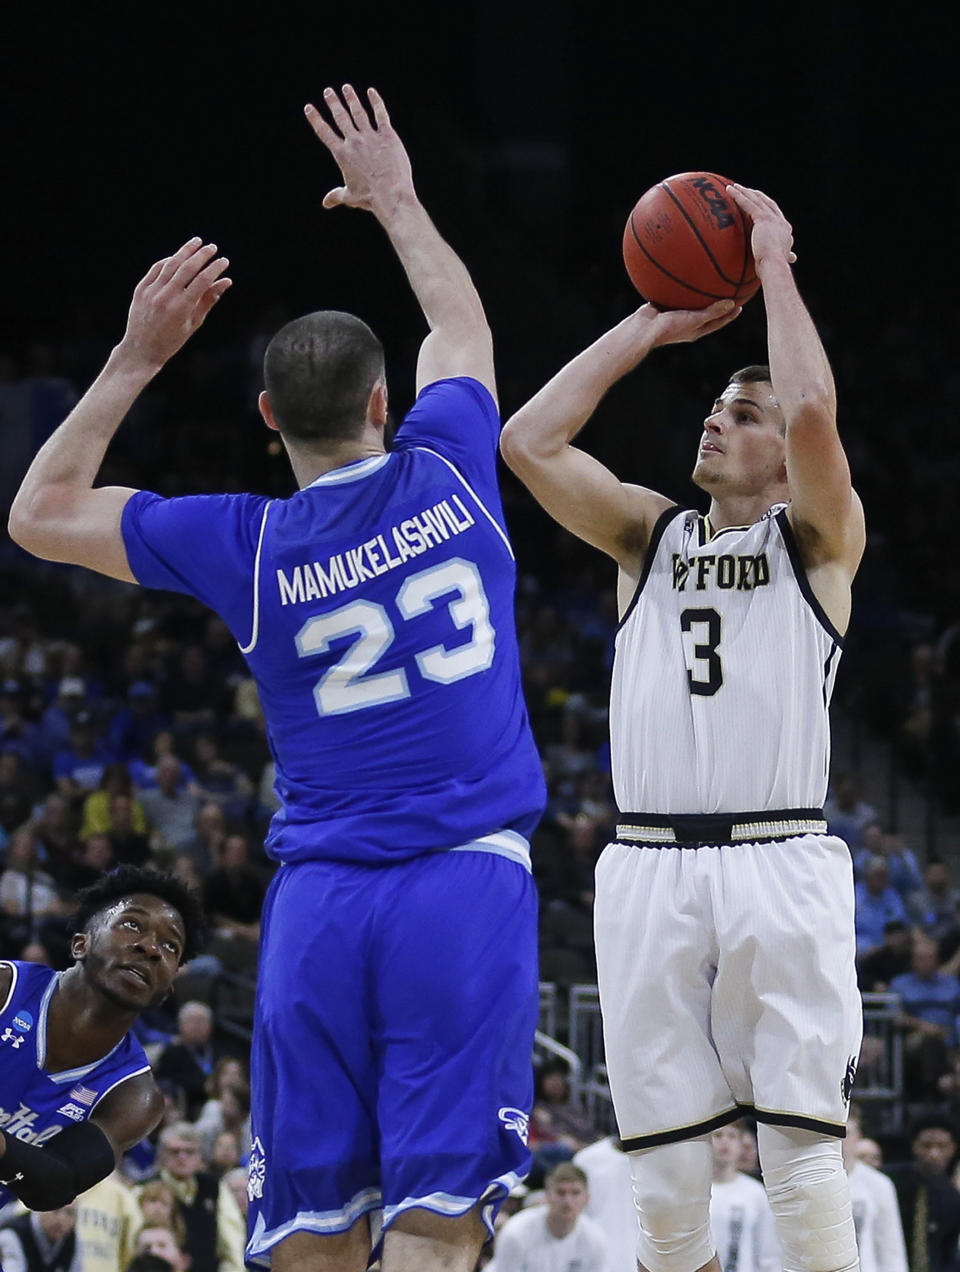 Wofford's Fletcher Magee (3) takes a 3-point shot over Seton Hall's Sandro Mamukelashvili (23) during the first half of a first-round game in the NCAA men’s college basketball tournament in Jacksonville, Fla., Thursday, March 21, 2019. (AP Photo/Stephen B. Morton)